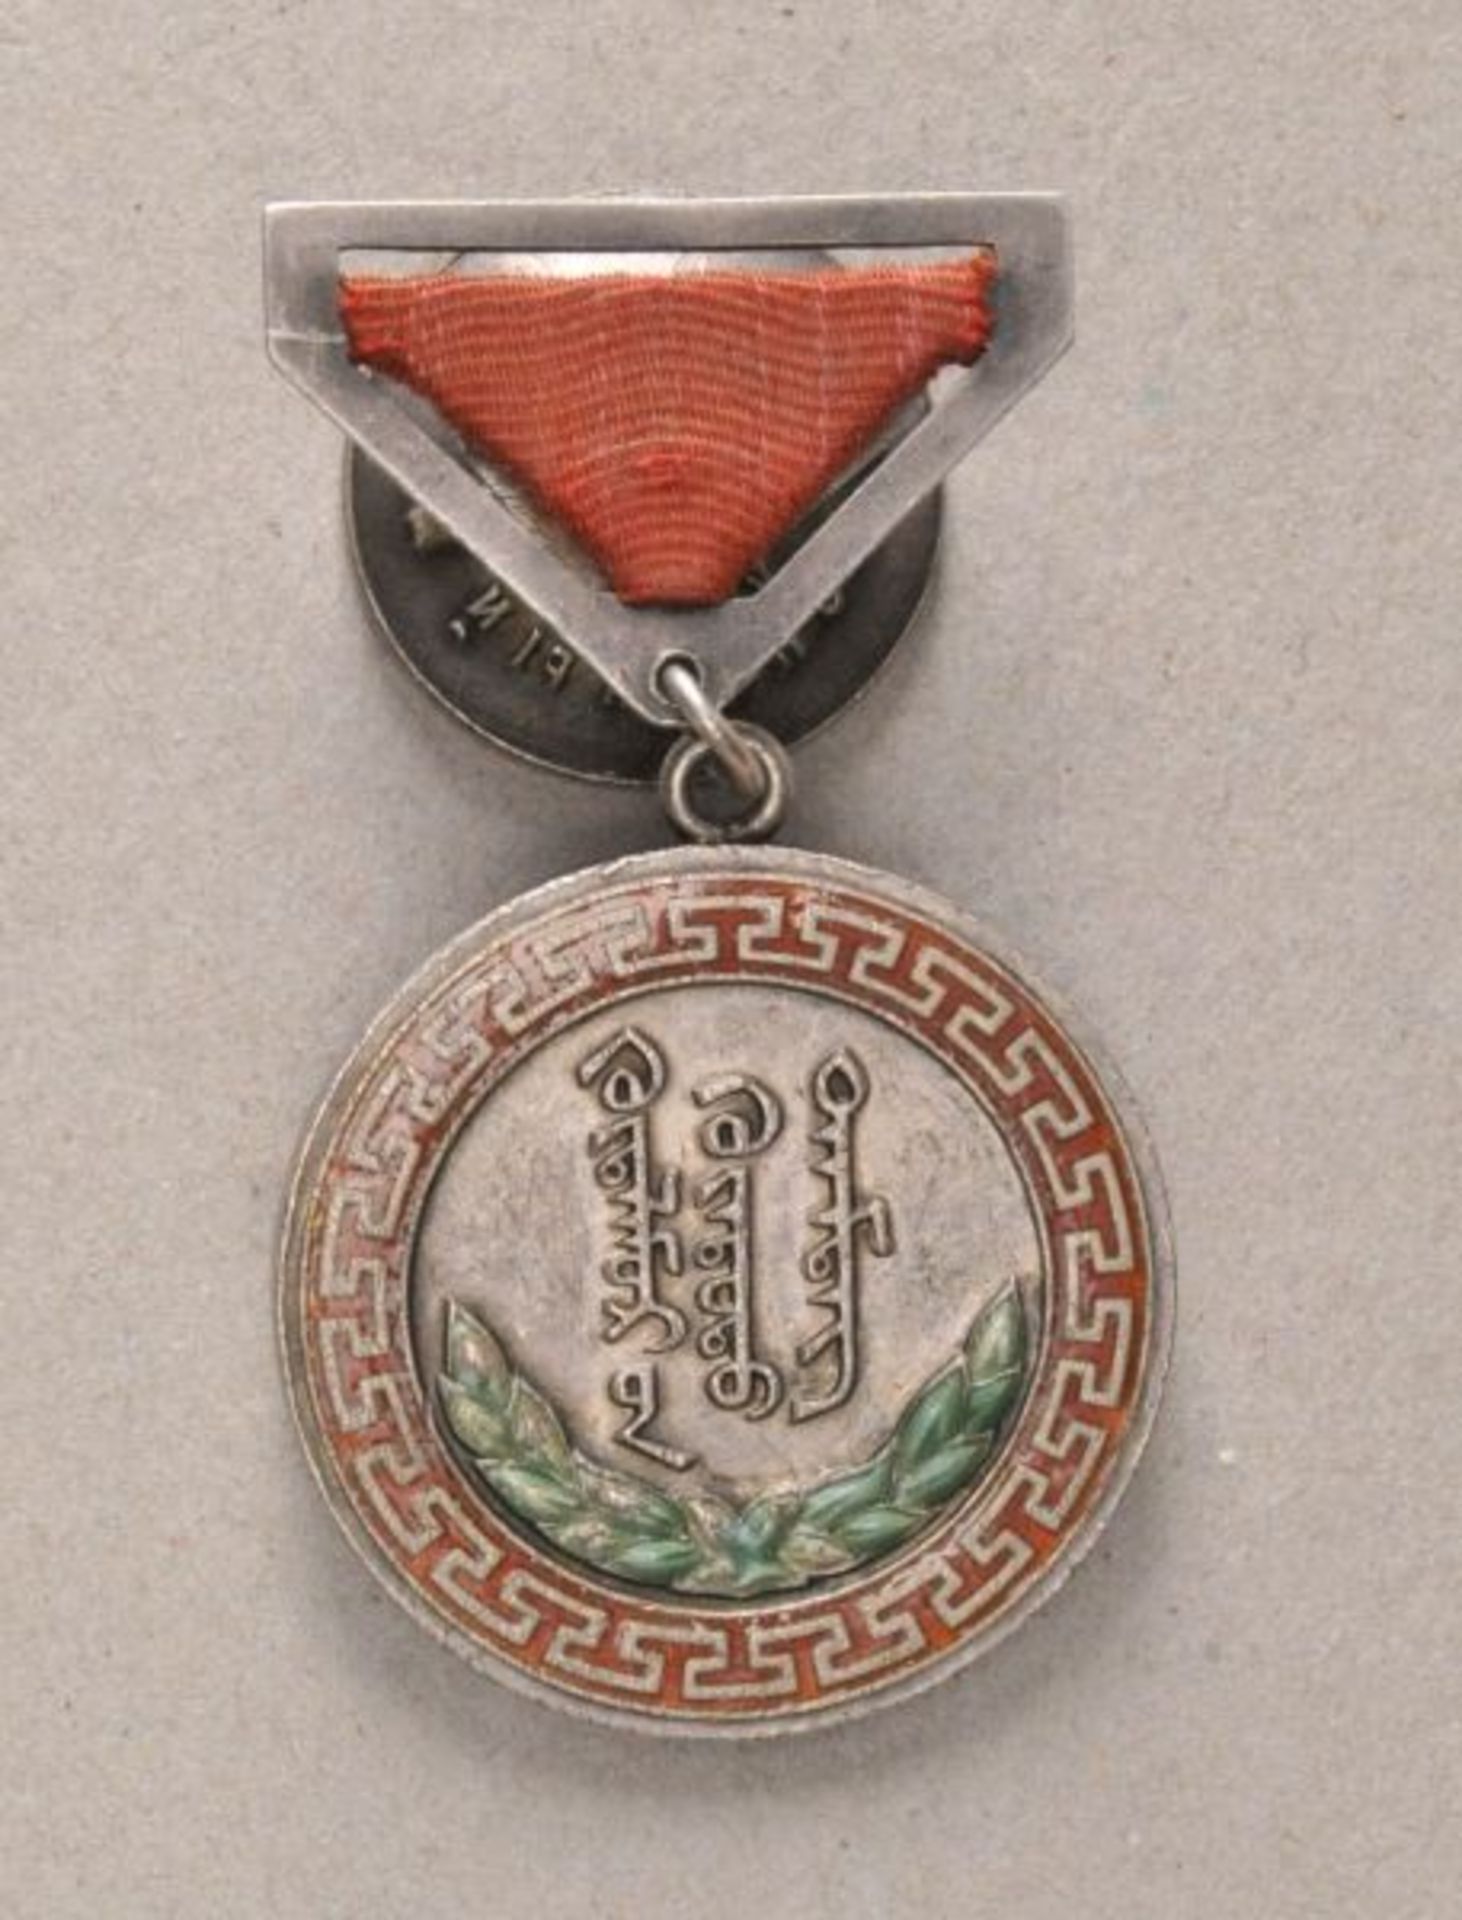 Mongolia  Medal for service, type 1.  Silver, partly enameled and gilded, marked 7164, on buckle